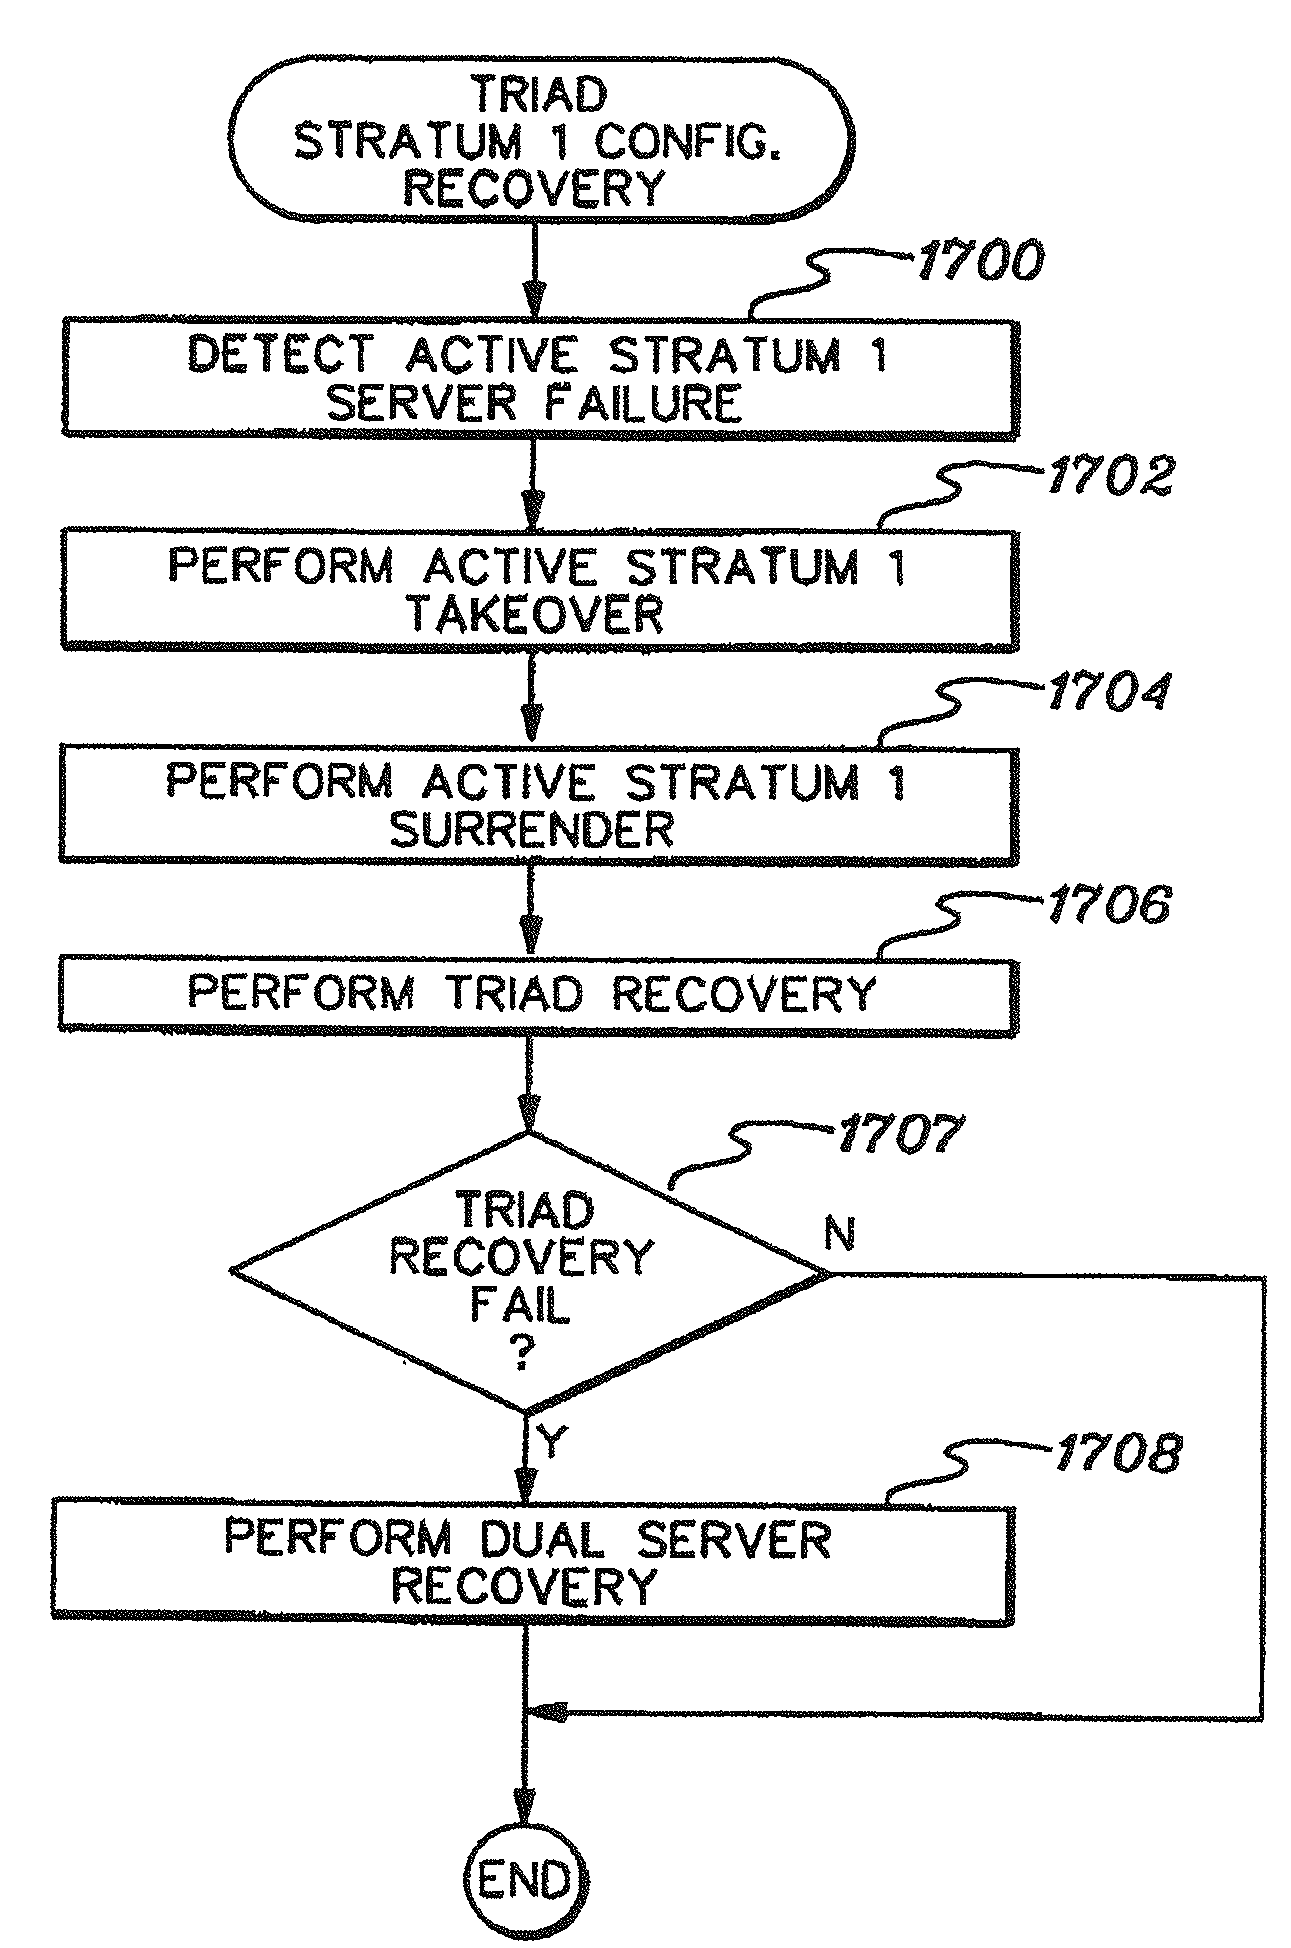 Facilitating recovery in a coordinated timing network